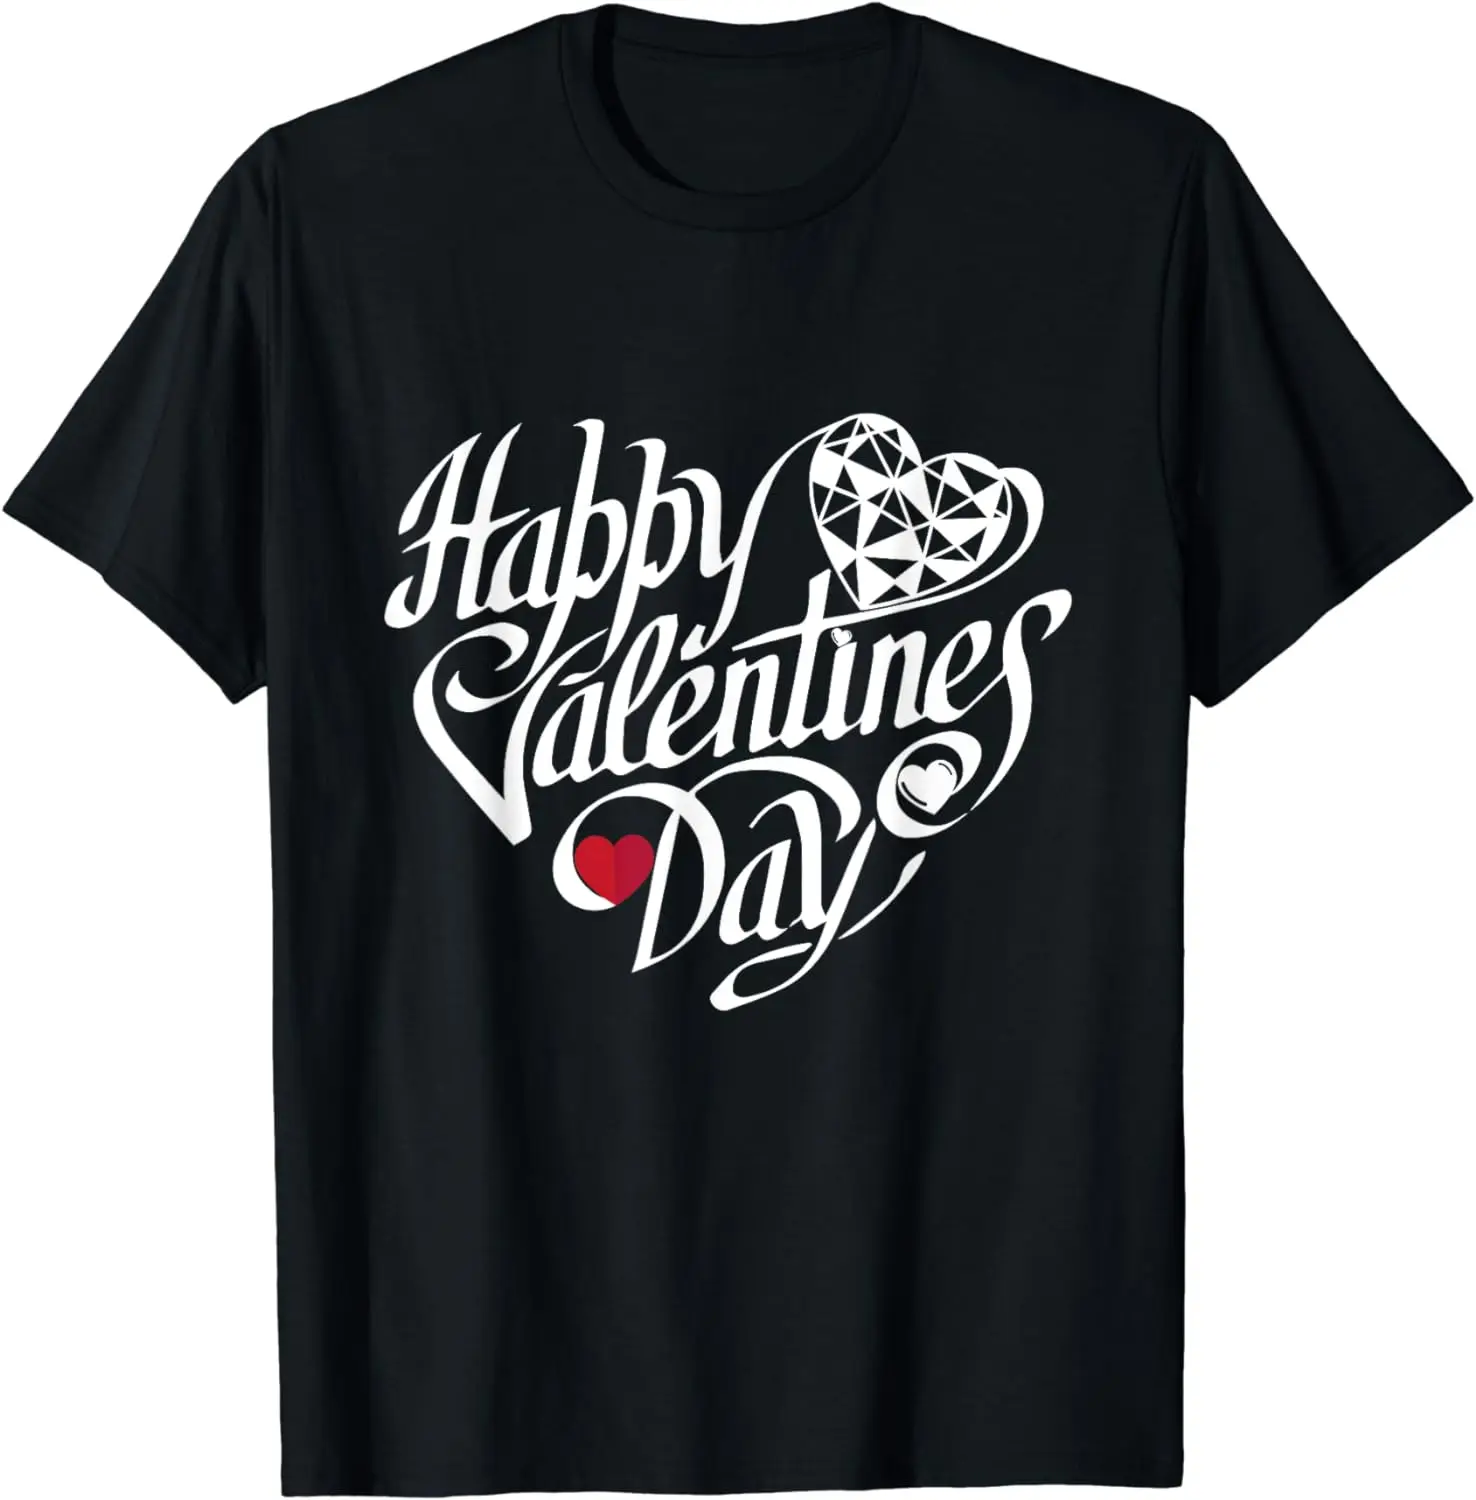 

Happy Valentine's Day Women Men Doodle Works Heart T-Shirt Casual Daily Four Seasons Short Holiday Gift for Girlfriend Wife